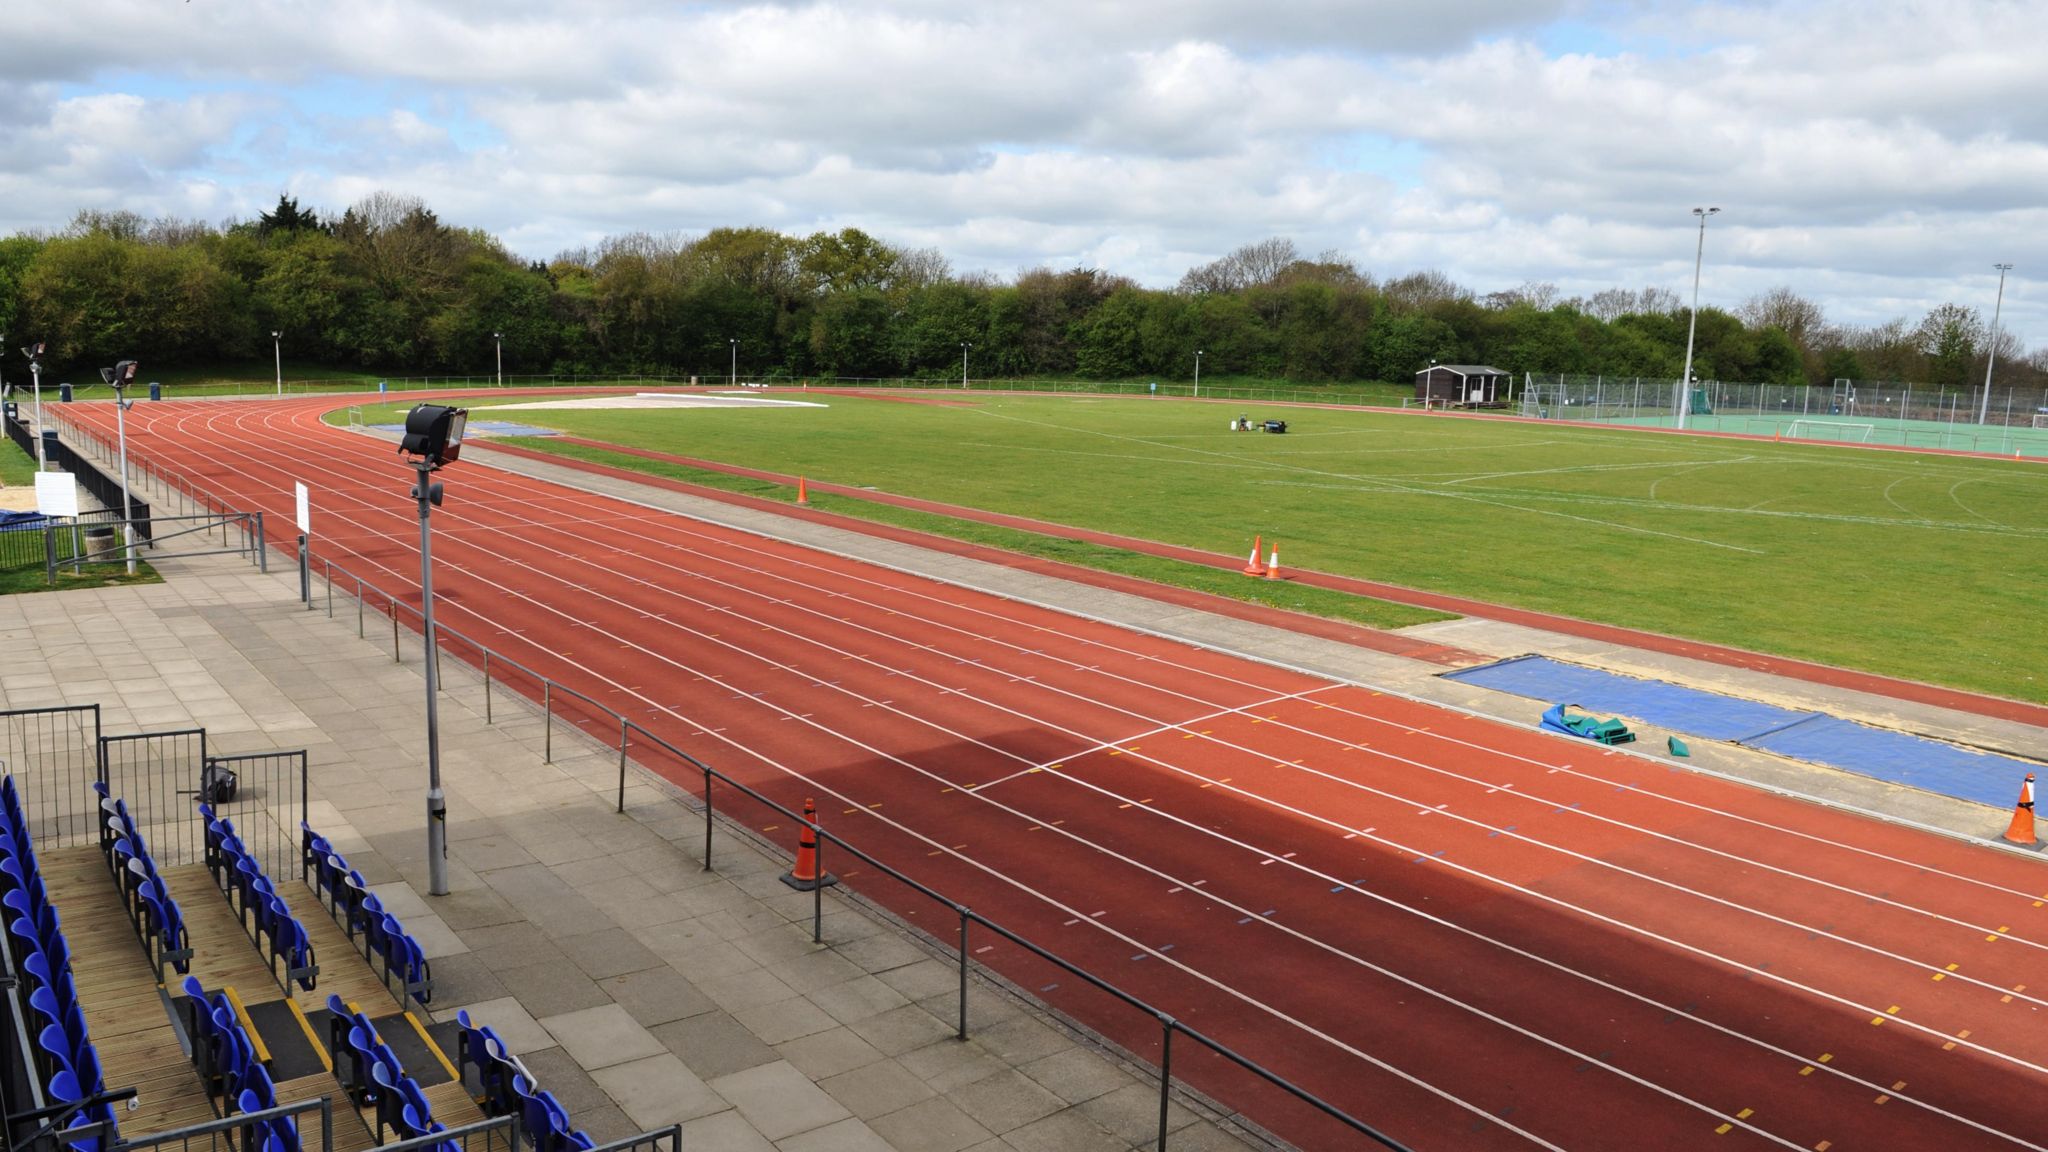 The athletics track at Northgate Sports Centre in Ipswich